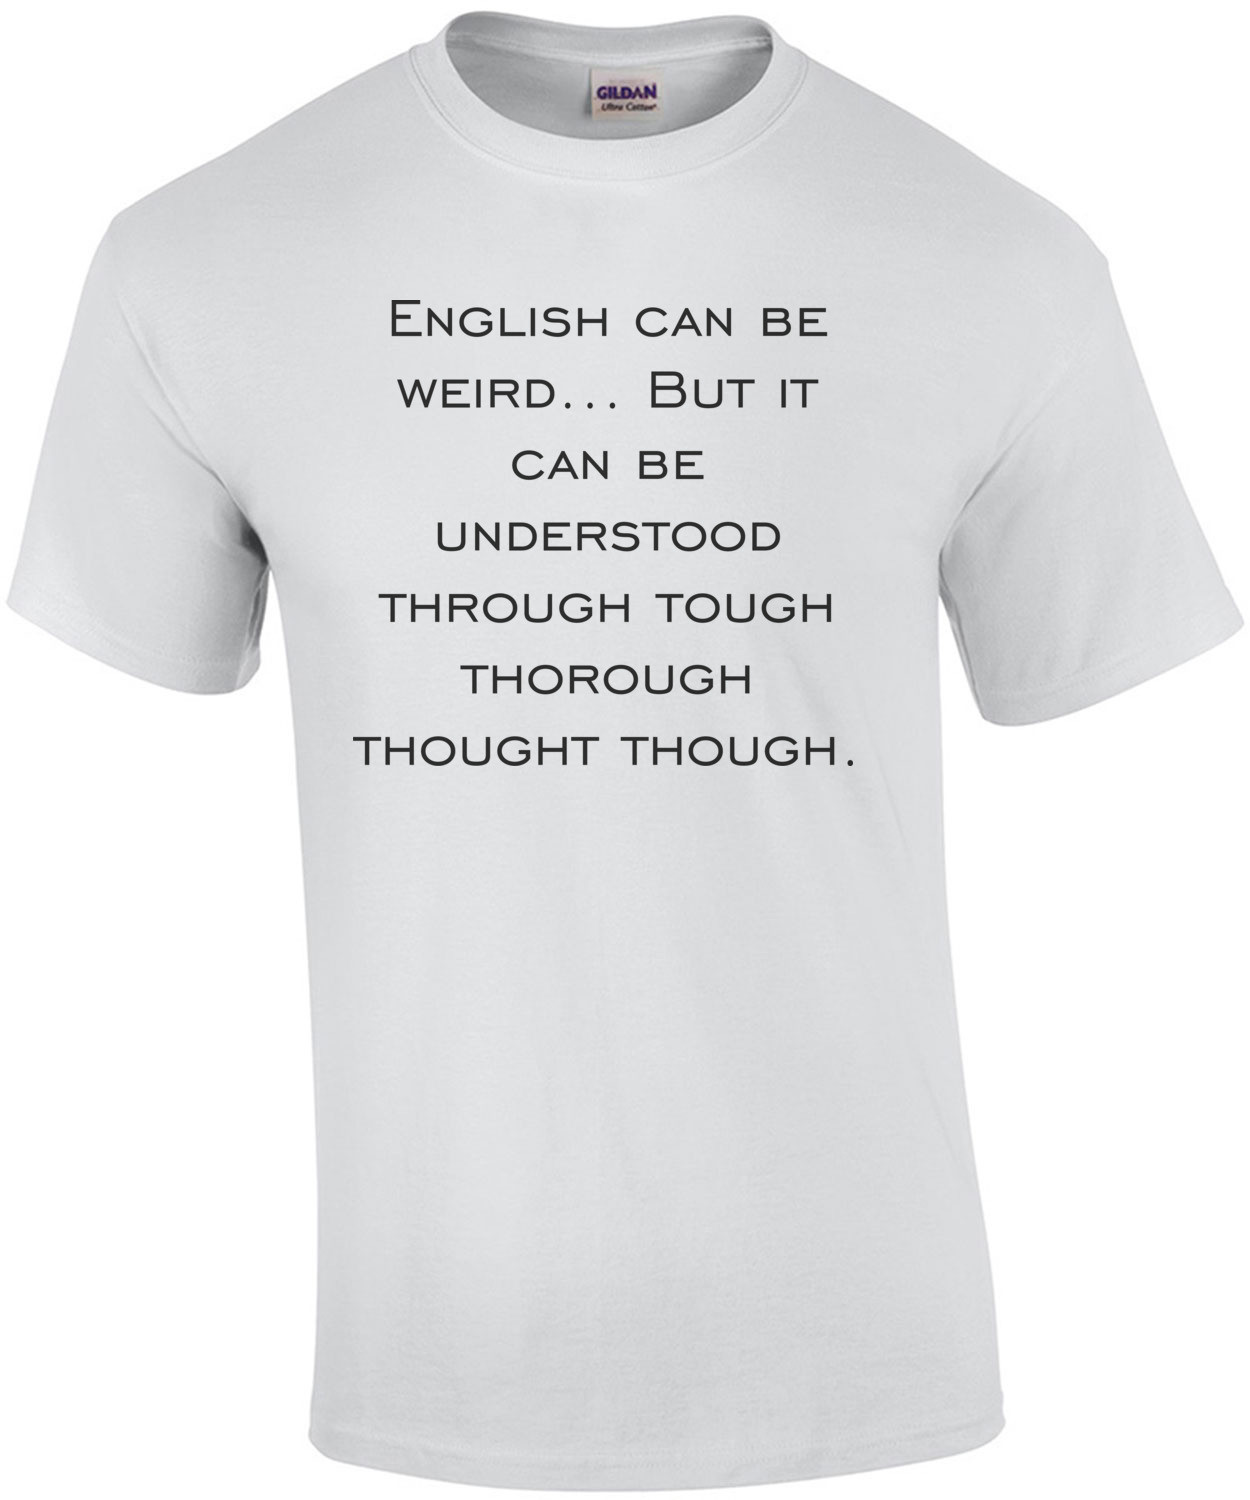 English can be weird... But it can be understood through tough thorough thought though. Funny T-Shirt